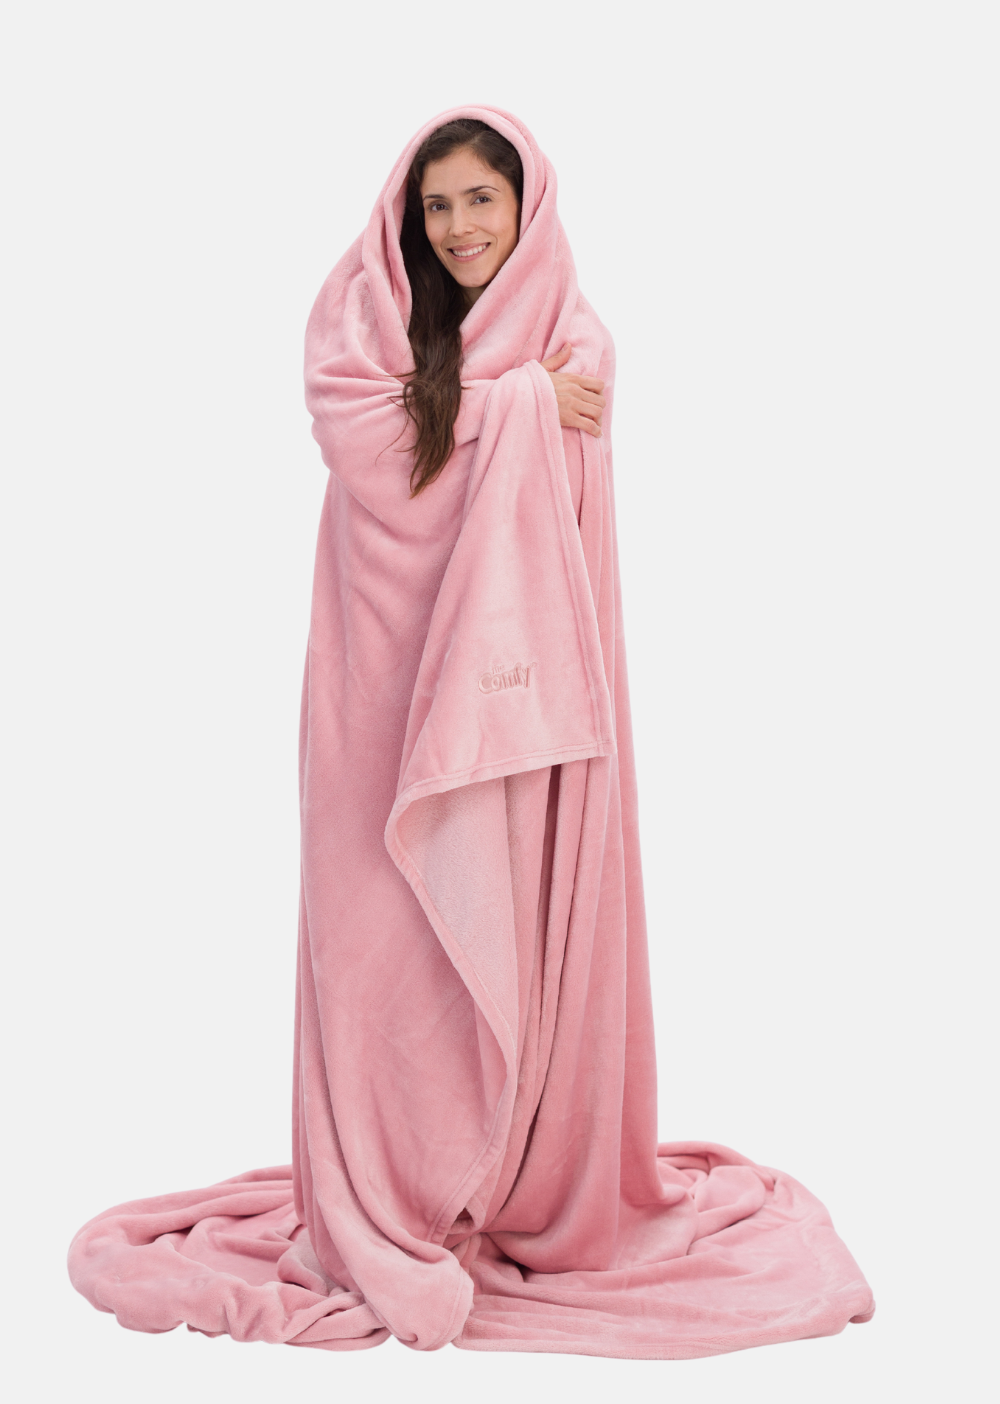 The Comfy – The Comfy Dream Wearable Blanket